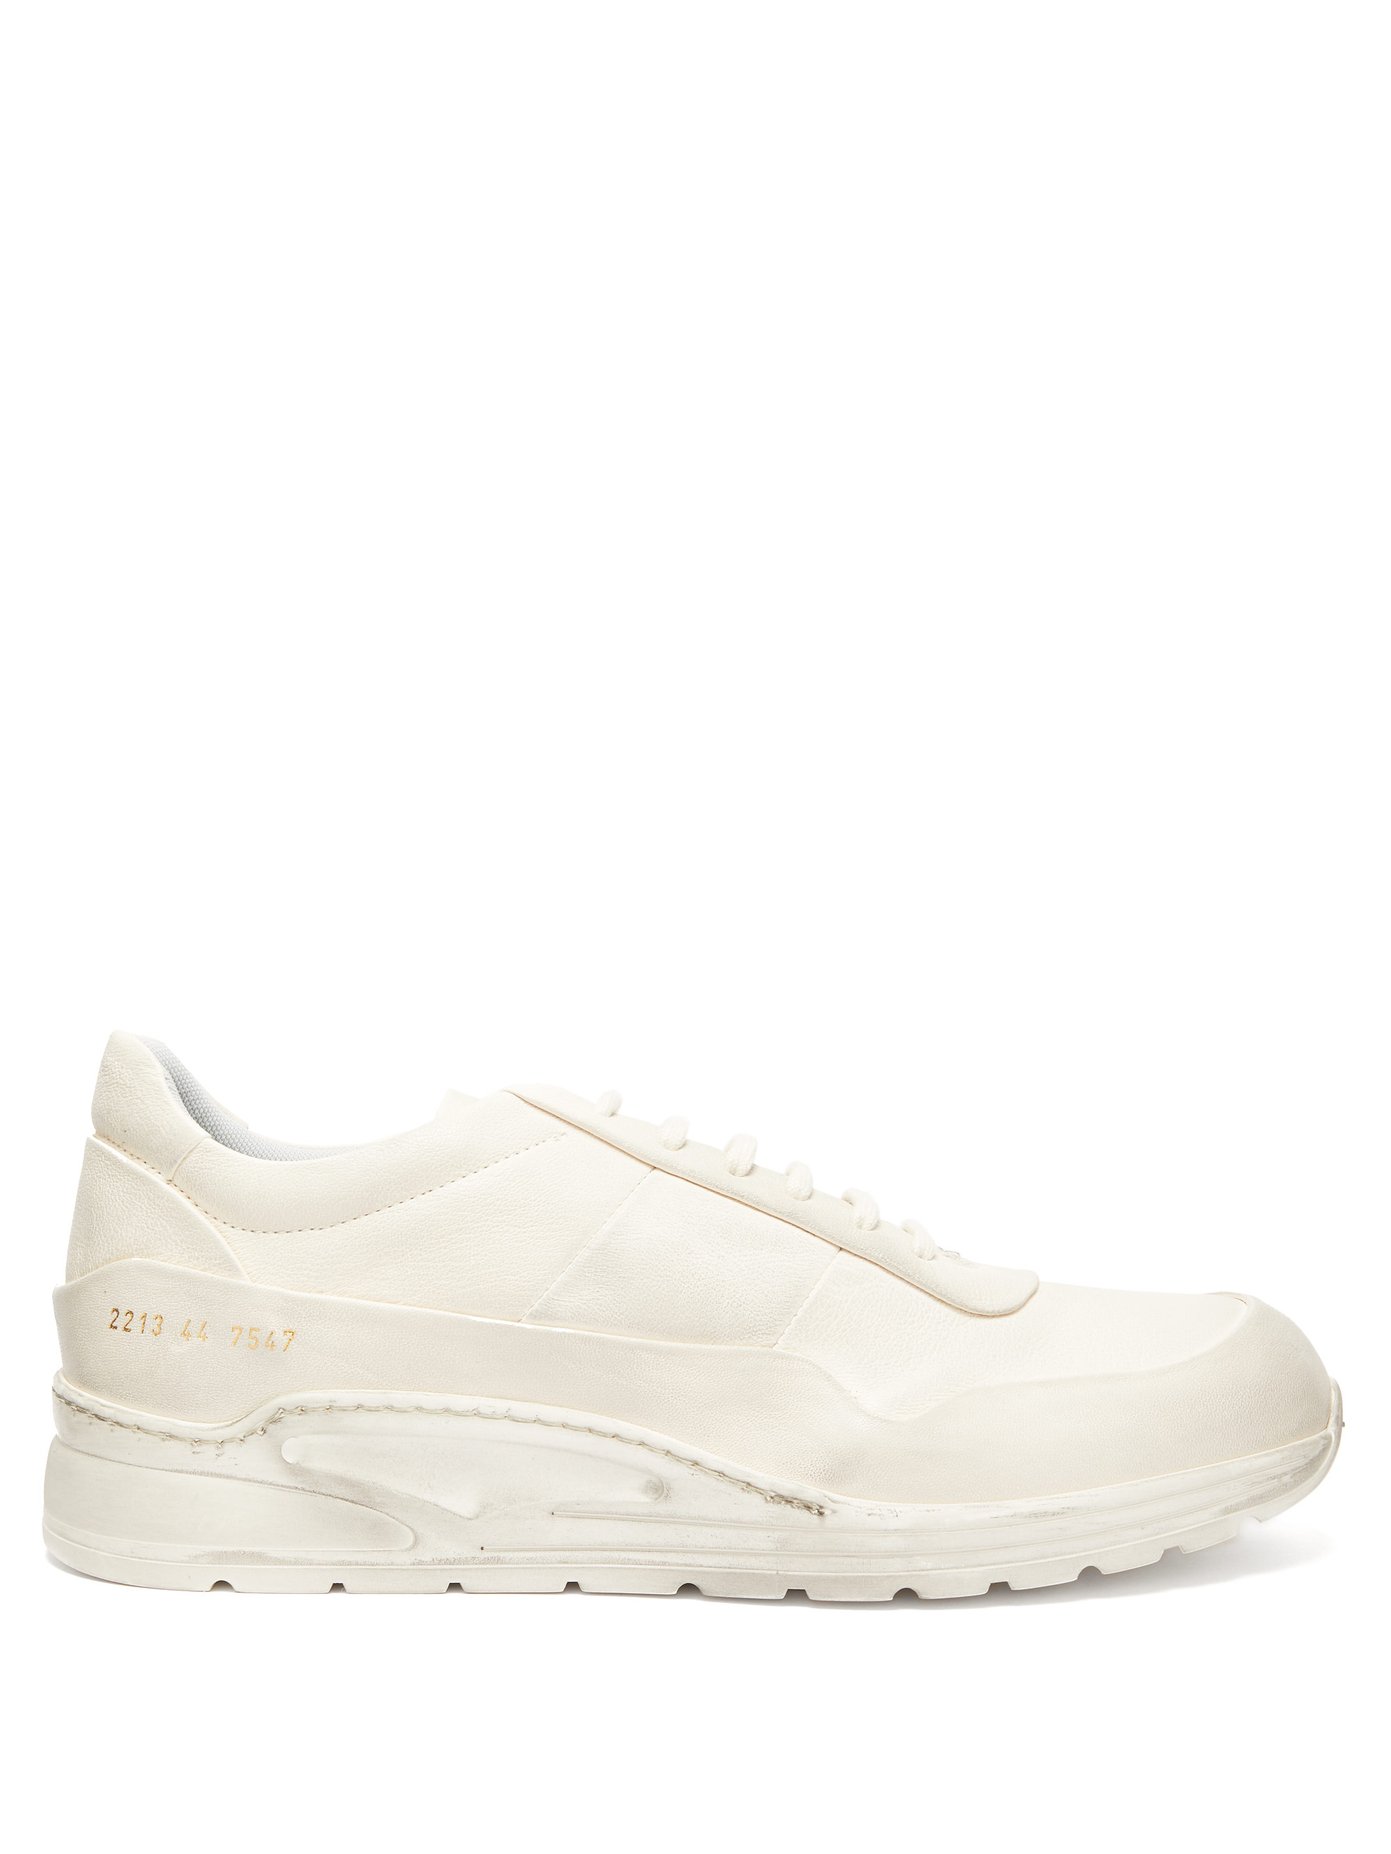 common projects trainers sale